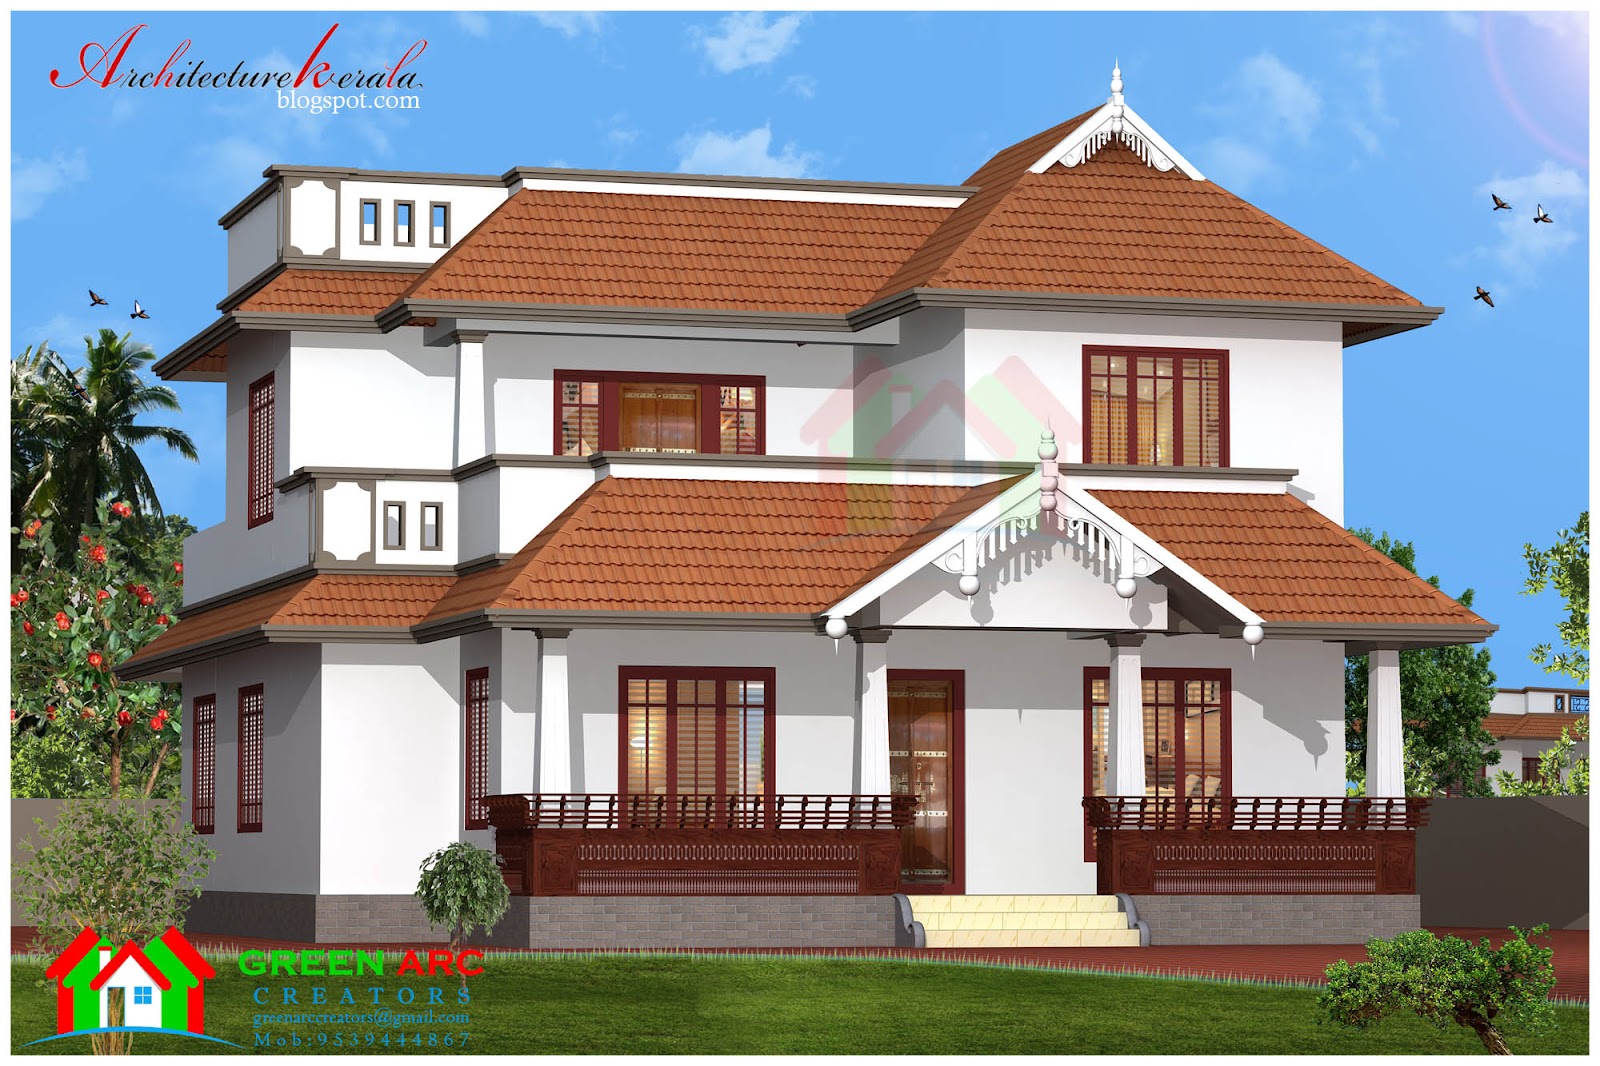 TRADITIONAL STYLE  KERALA  HOUSE  PLAN  AND ELEVATION 